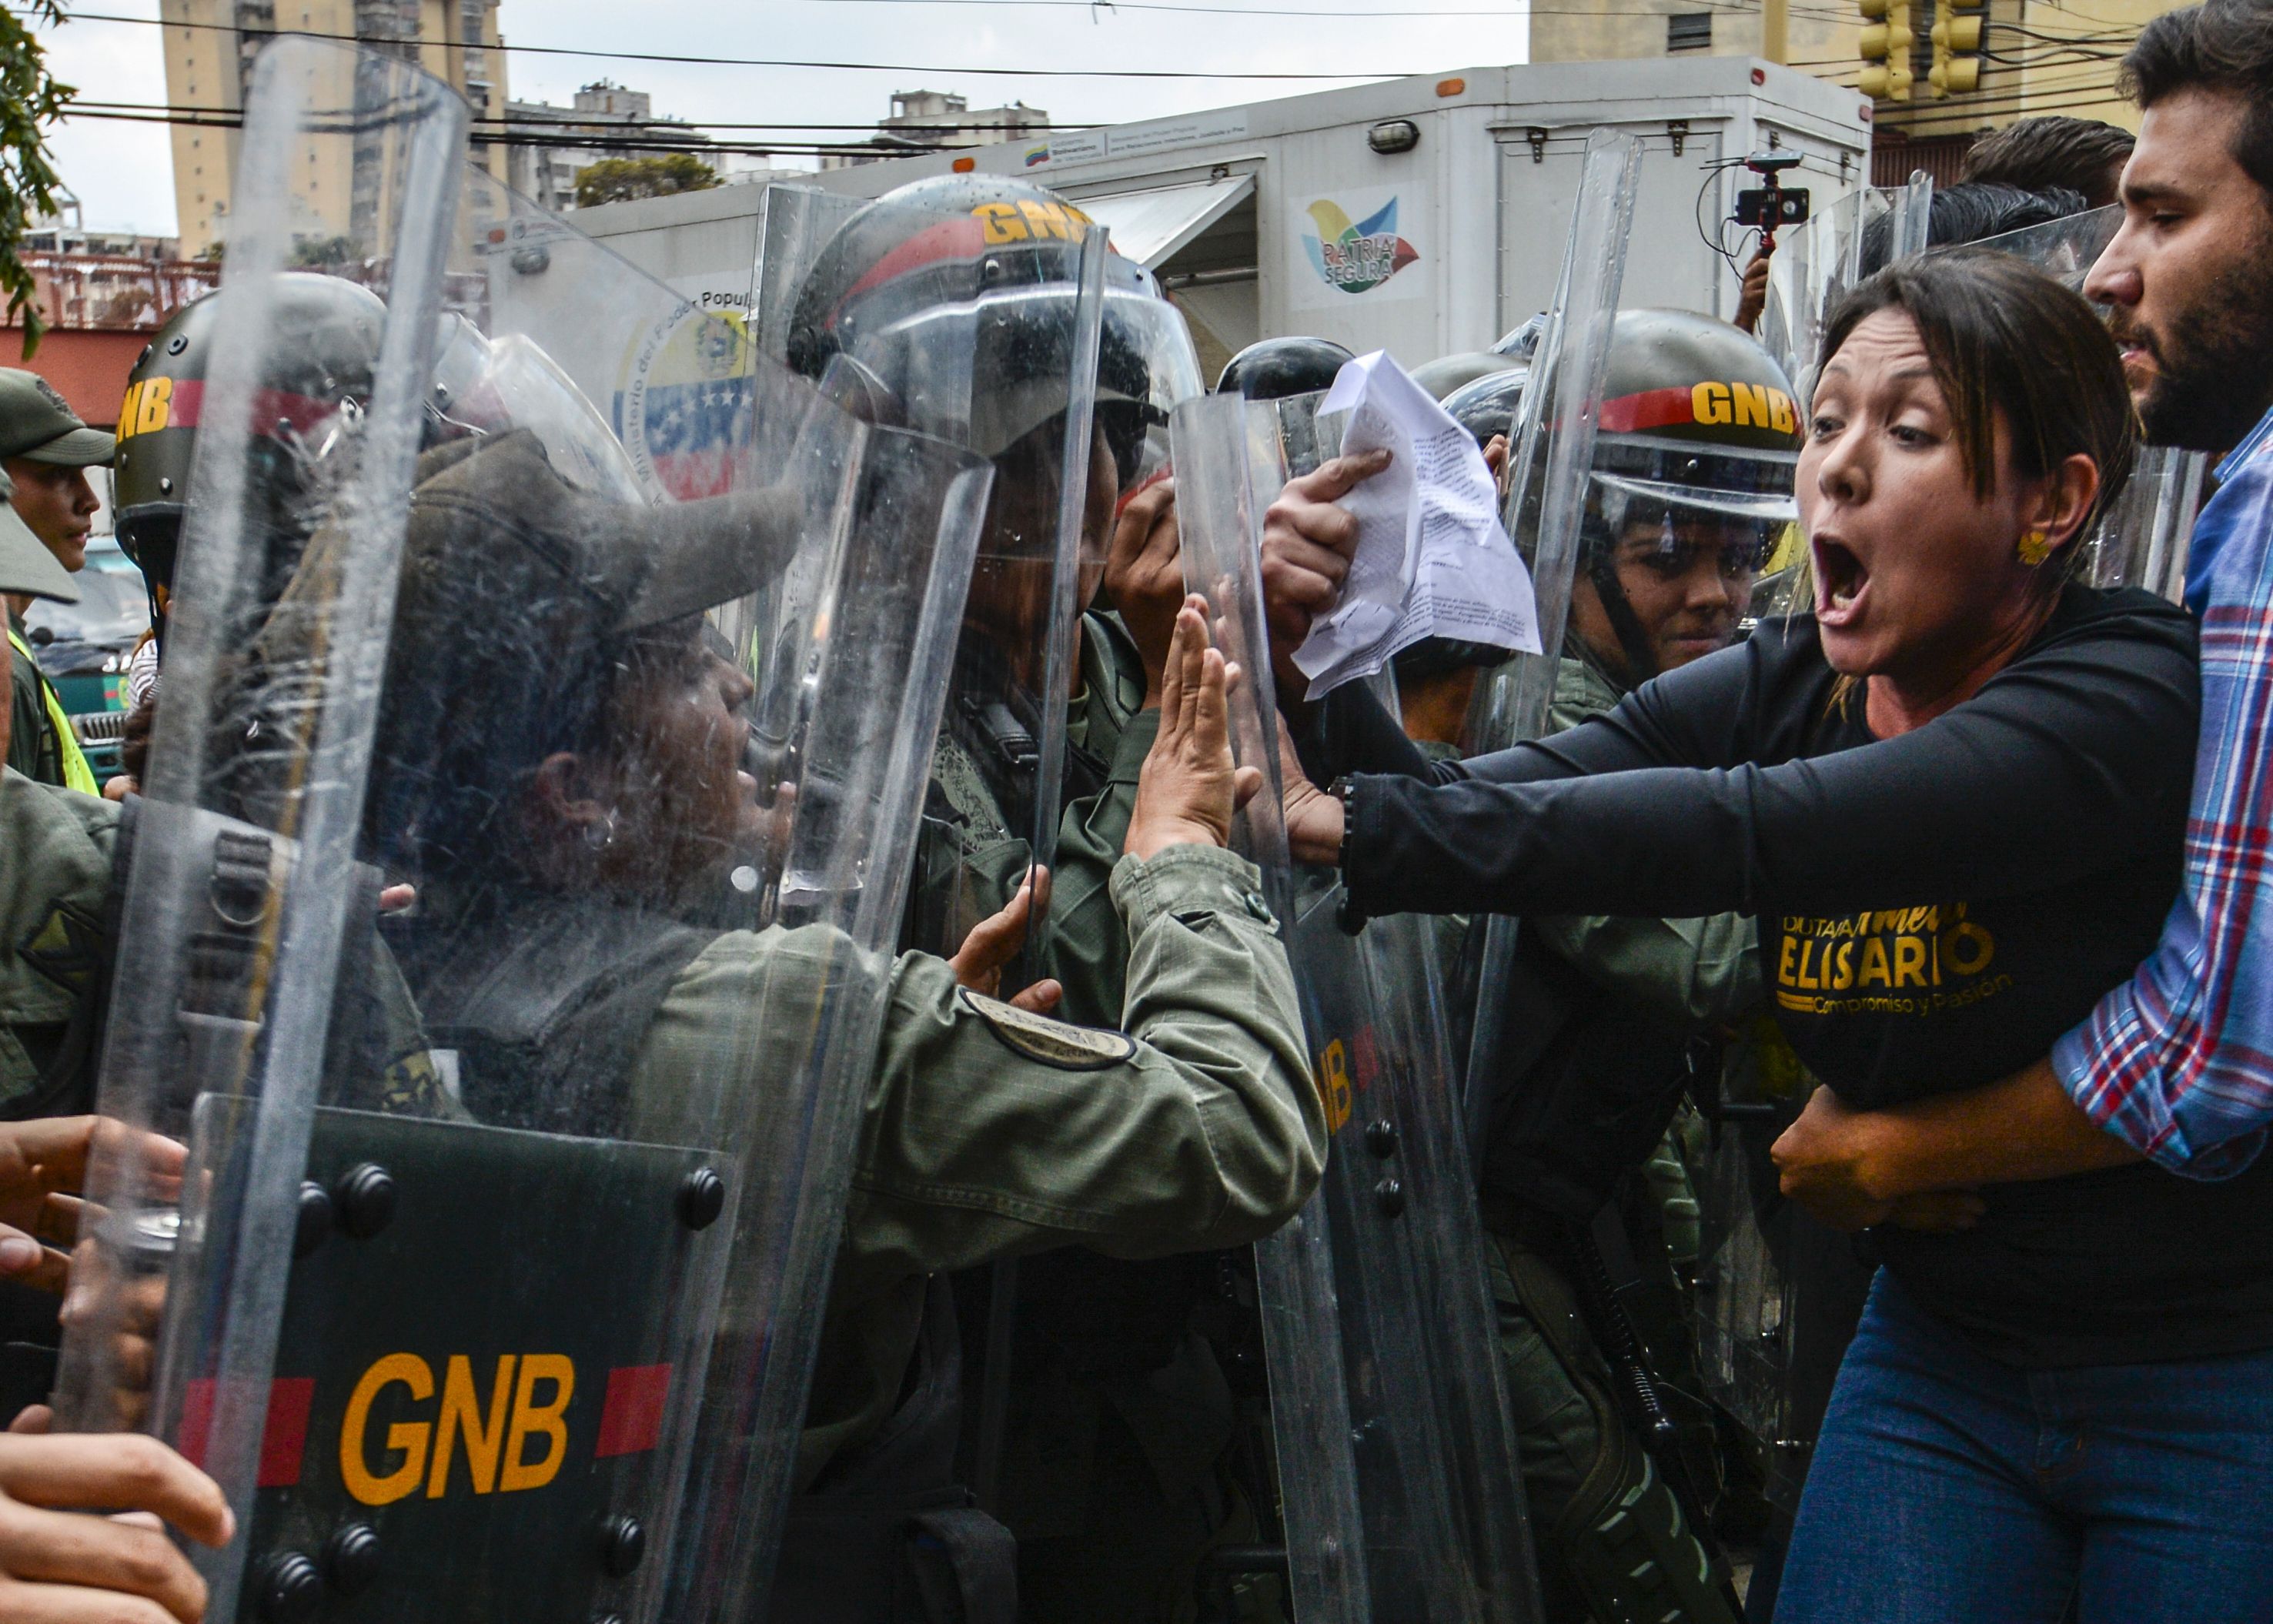 TOPSHOT - Venezuelan opposition deputy Amelia Belisario (2nd-R) scuffles with National Guard personnel in riot gear during a protest in front of the Supreme Court in Caracas on March 30, 2017. Venezuela's Supreme Court took over legislative powers Thursday from the opposition-majority National Assembly, whose speaker accused leftist President Nicolas Maduro of staging a "coup." / AFP PHOTO / JUAN BARRETO / TT / kod 444